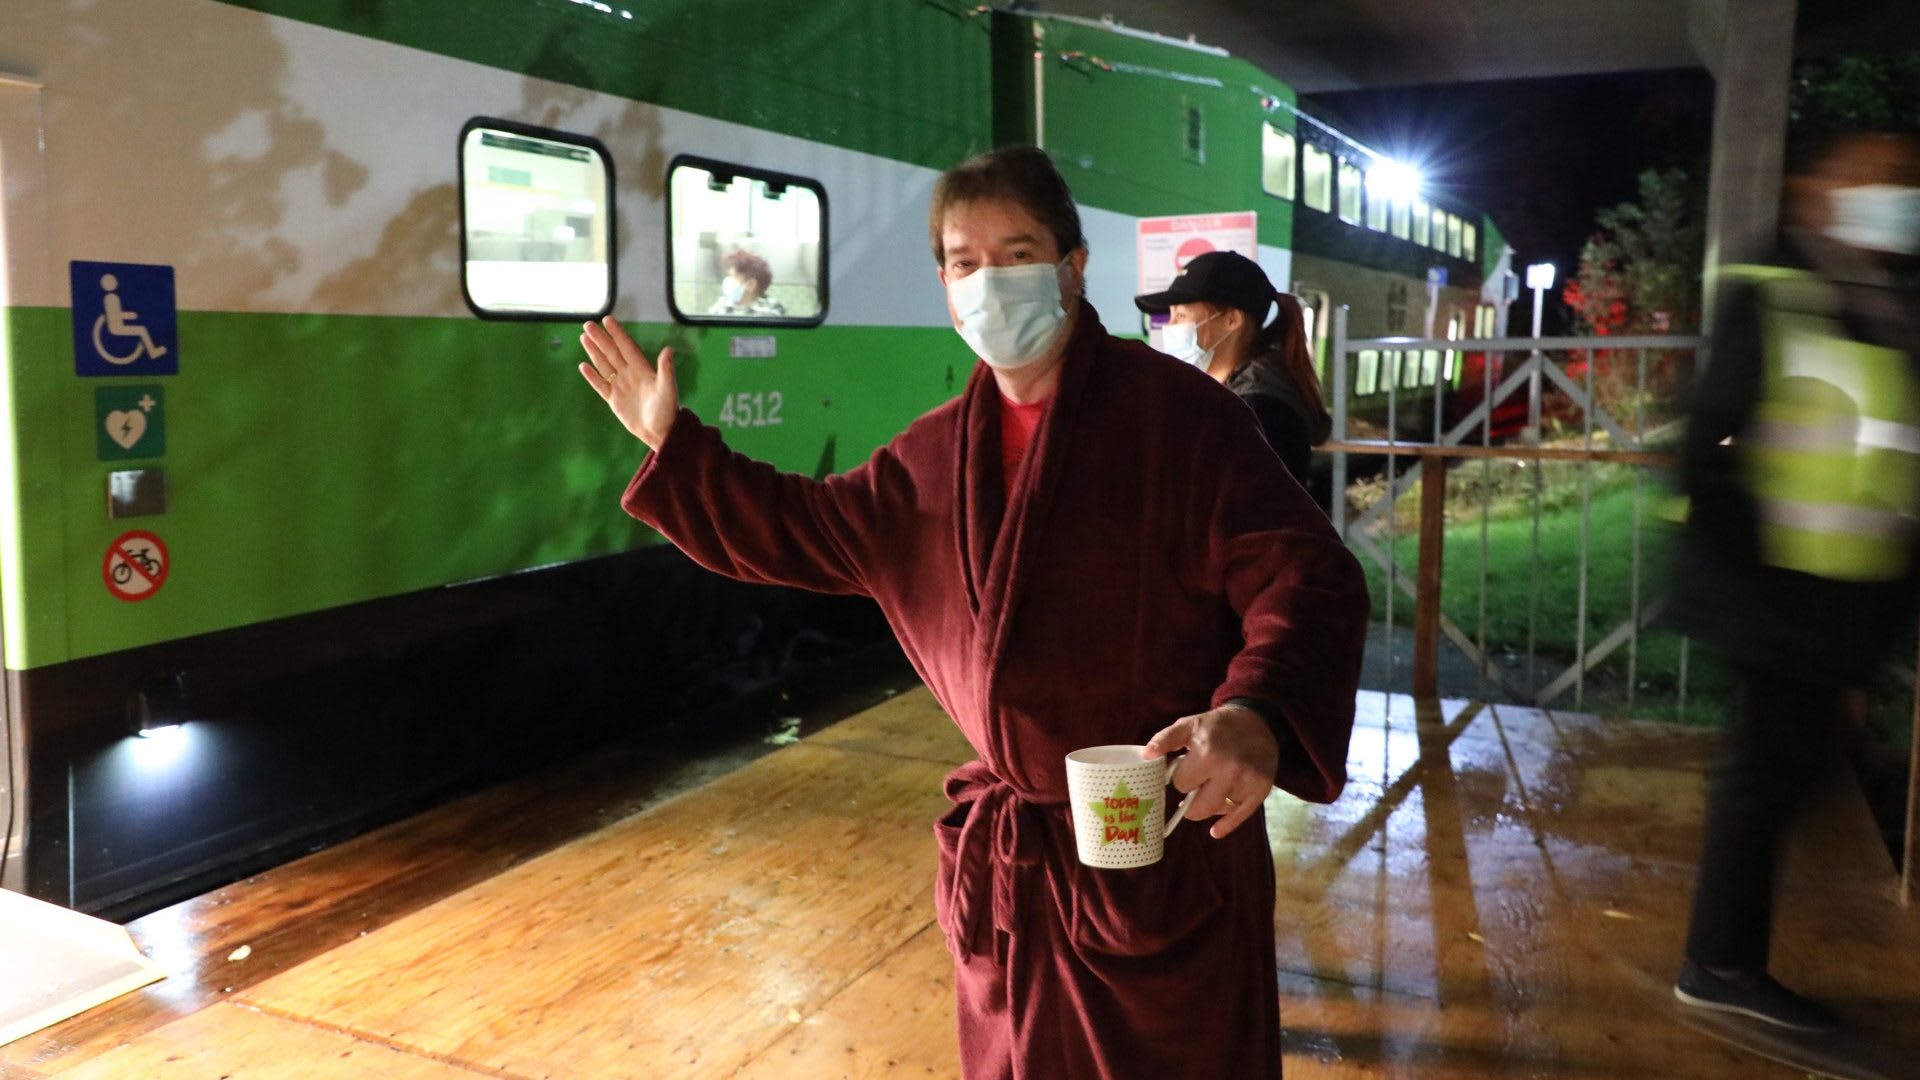 Mayor stands in a robe, holding a coffee